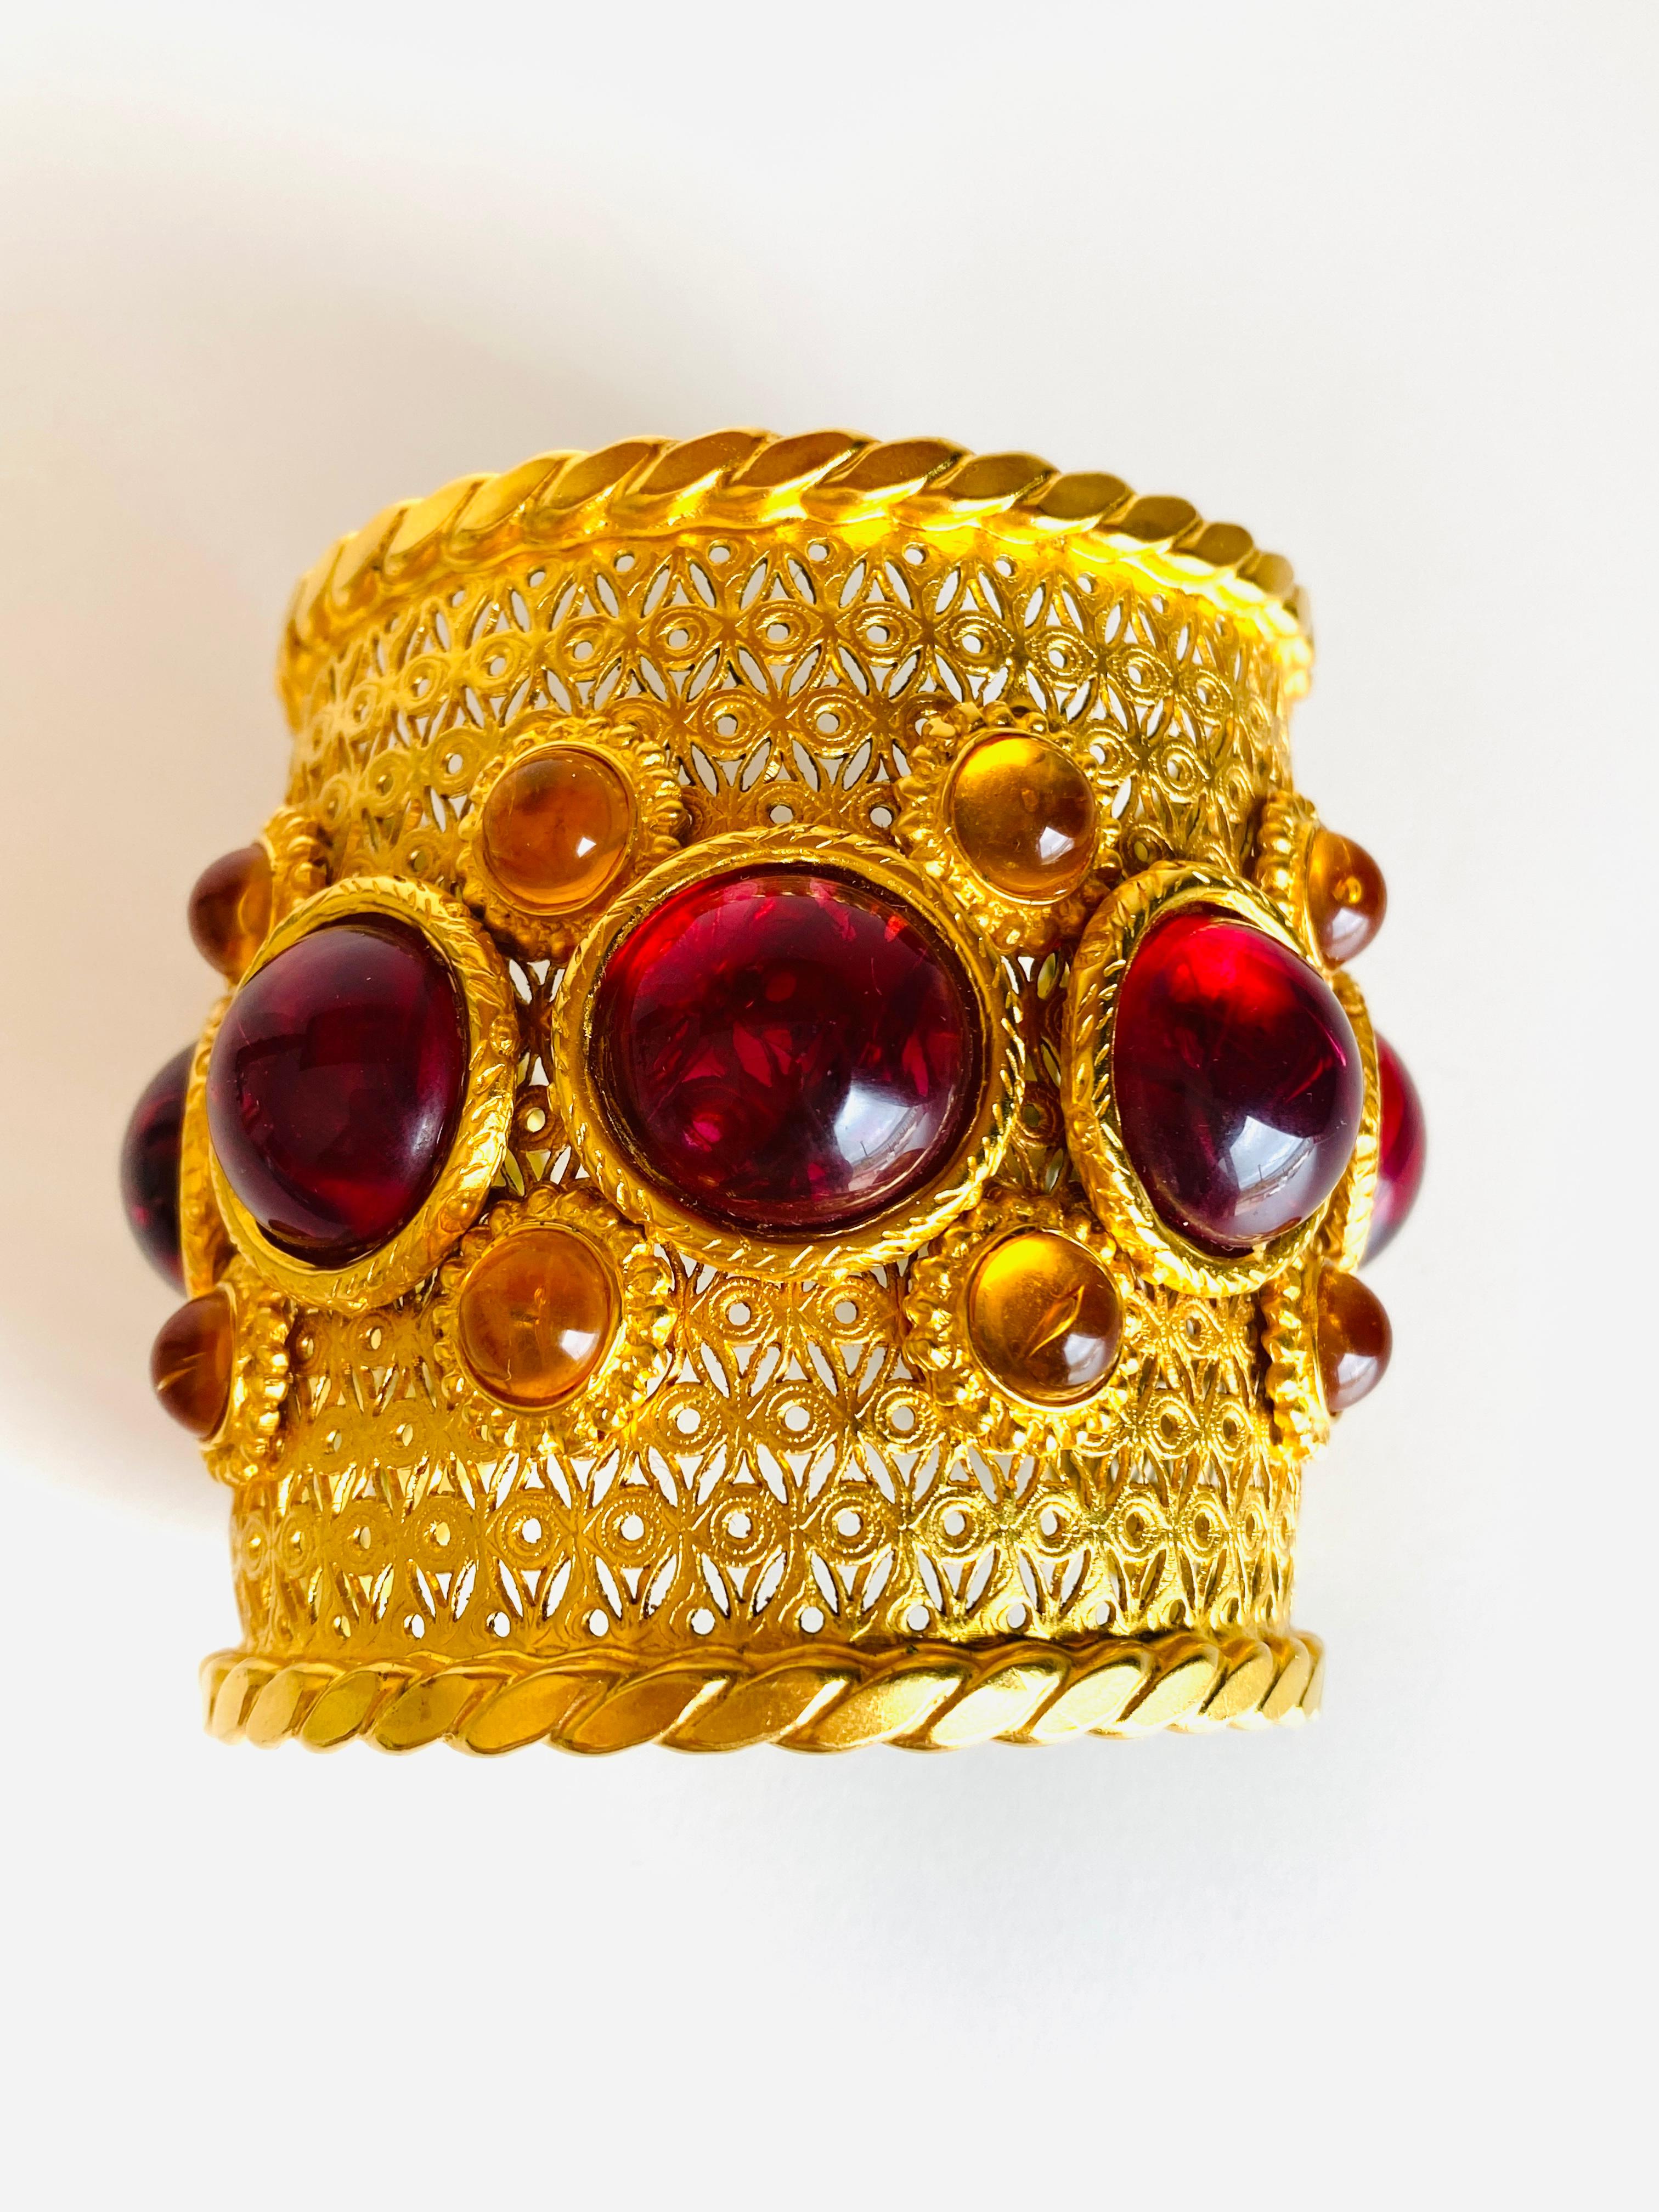 1980's Deanna Hamro cuff bracelet featuring bold red and gold pate de verre cabochons.

Width: 2-5/8